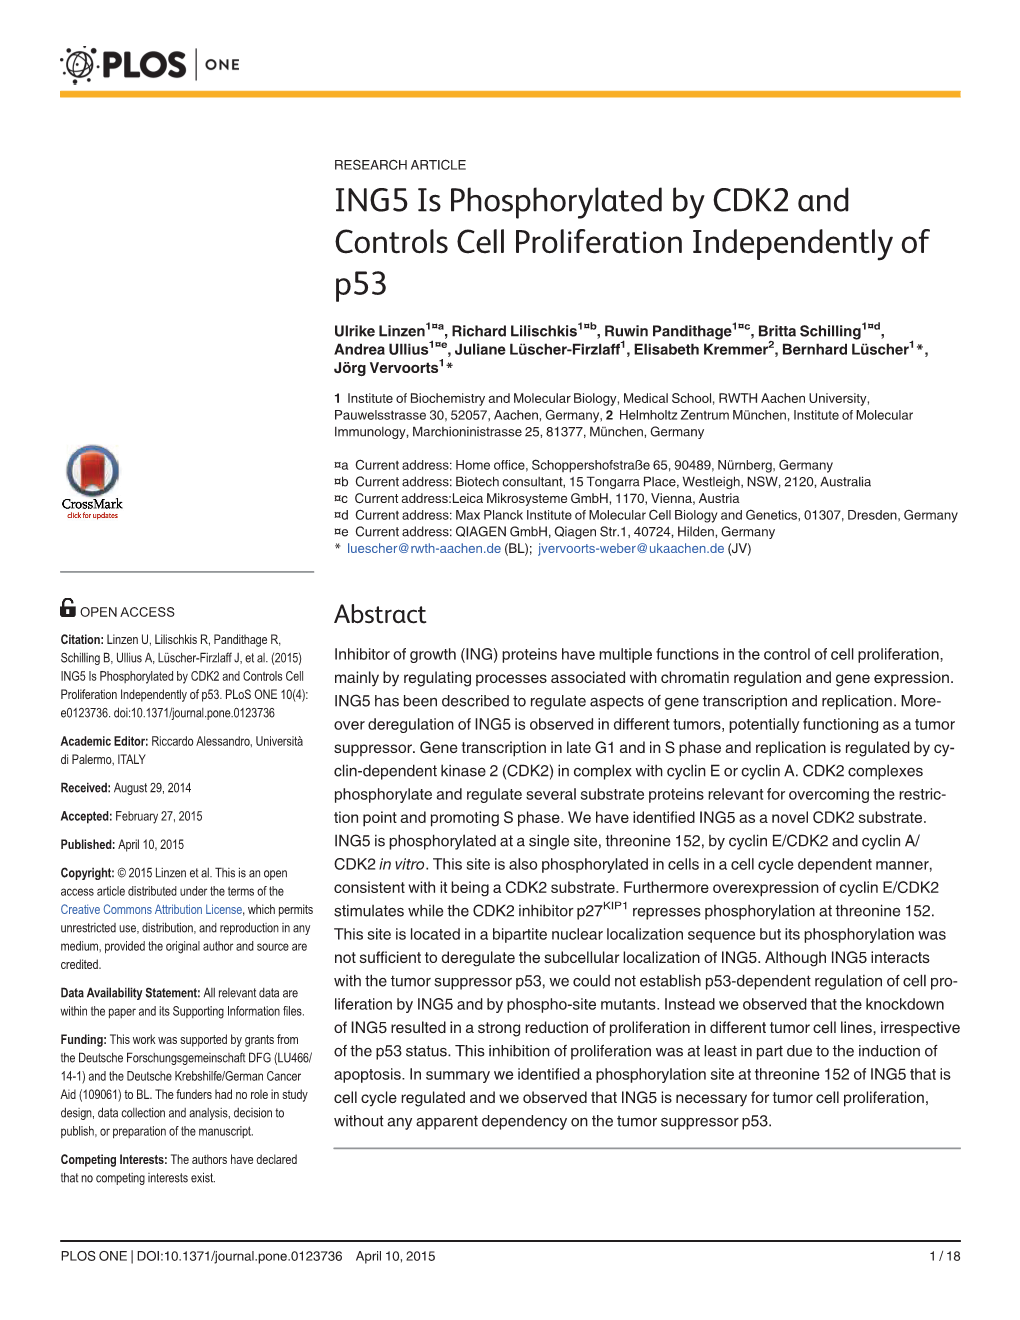 ING5 Is Phosphorylated by CDK2 and Controls Cell Proliferation Independently of P53